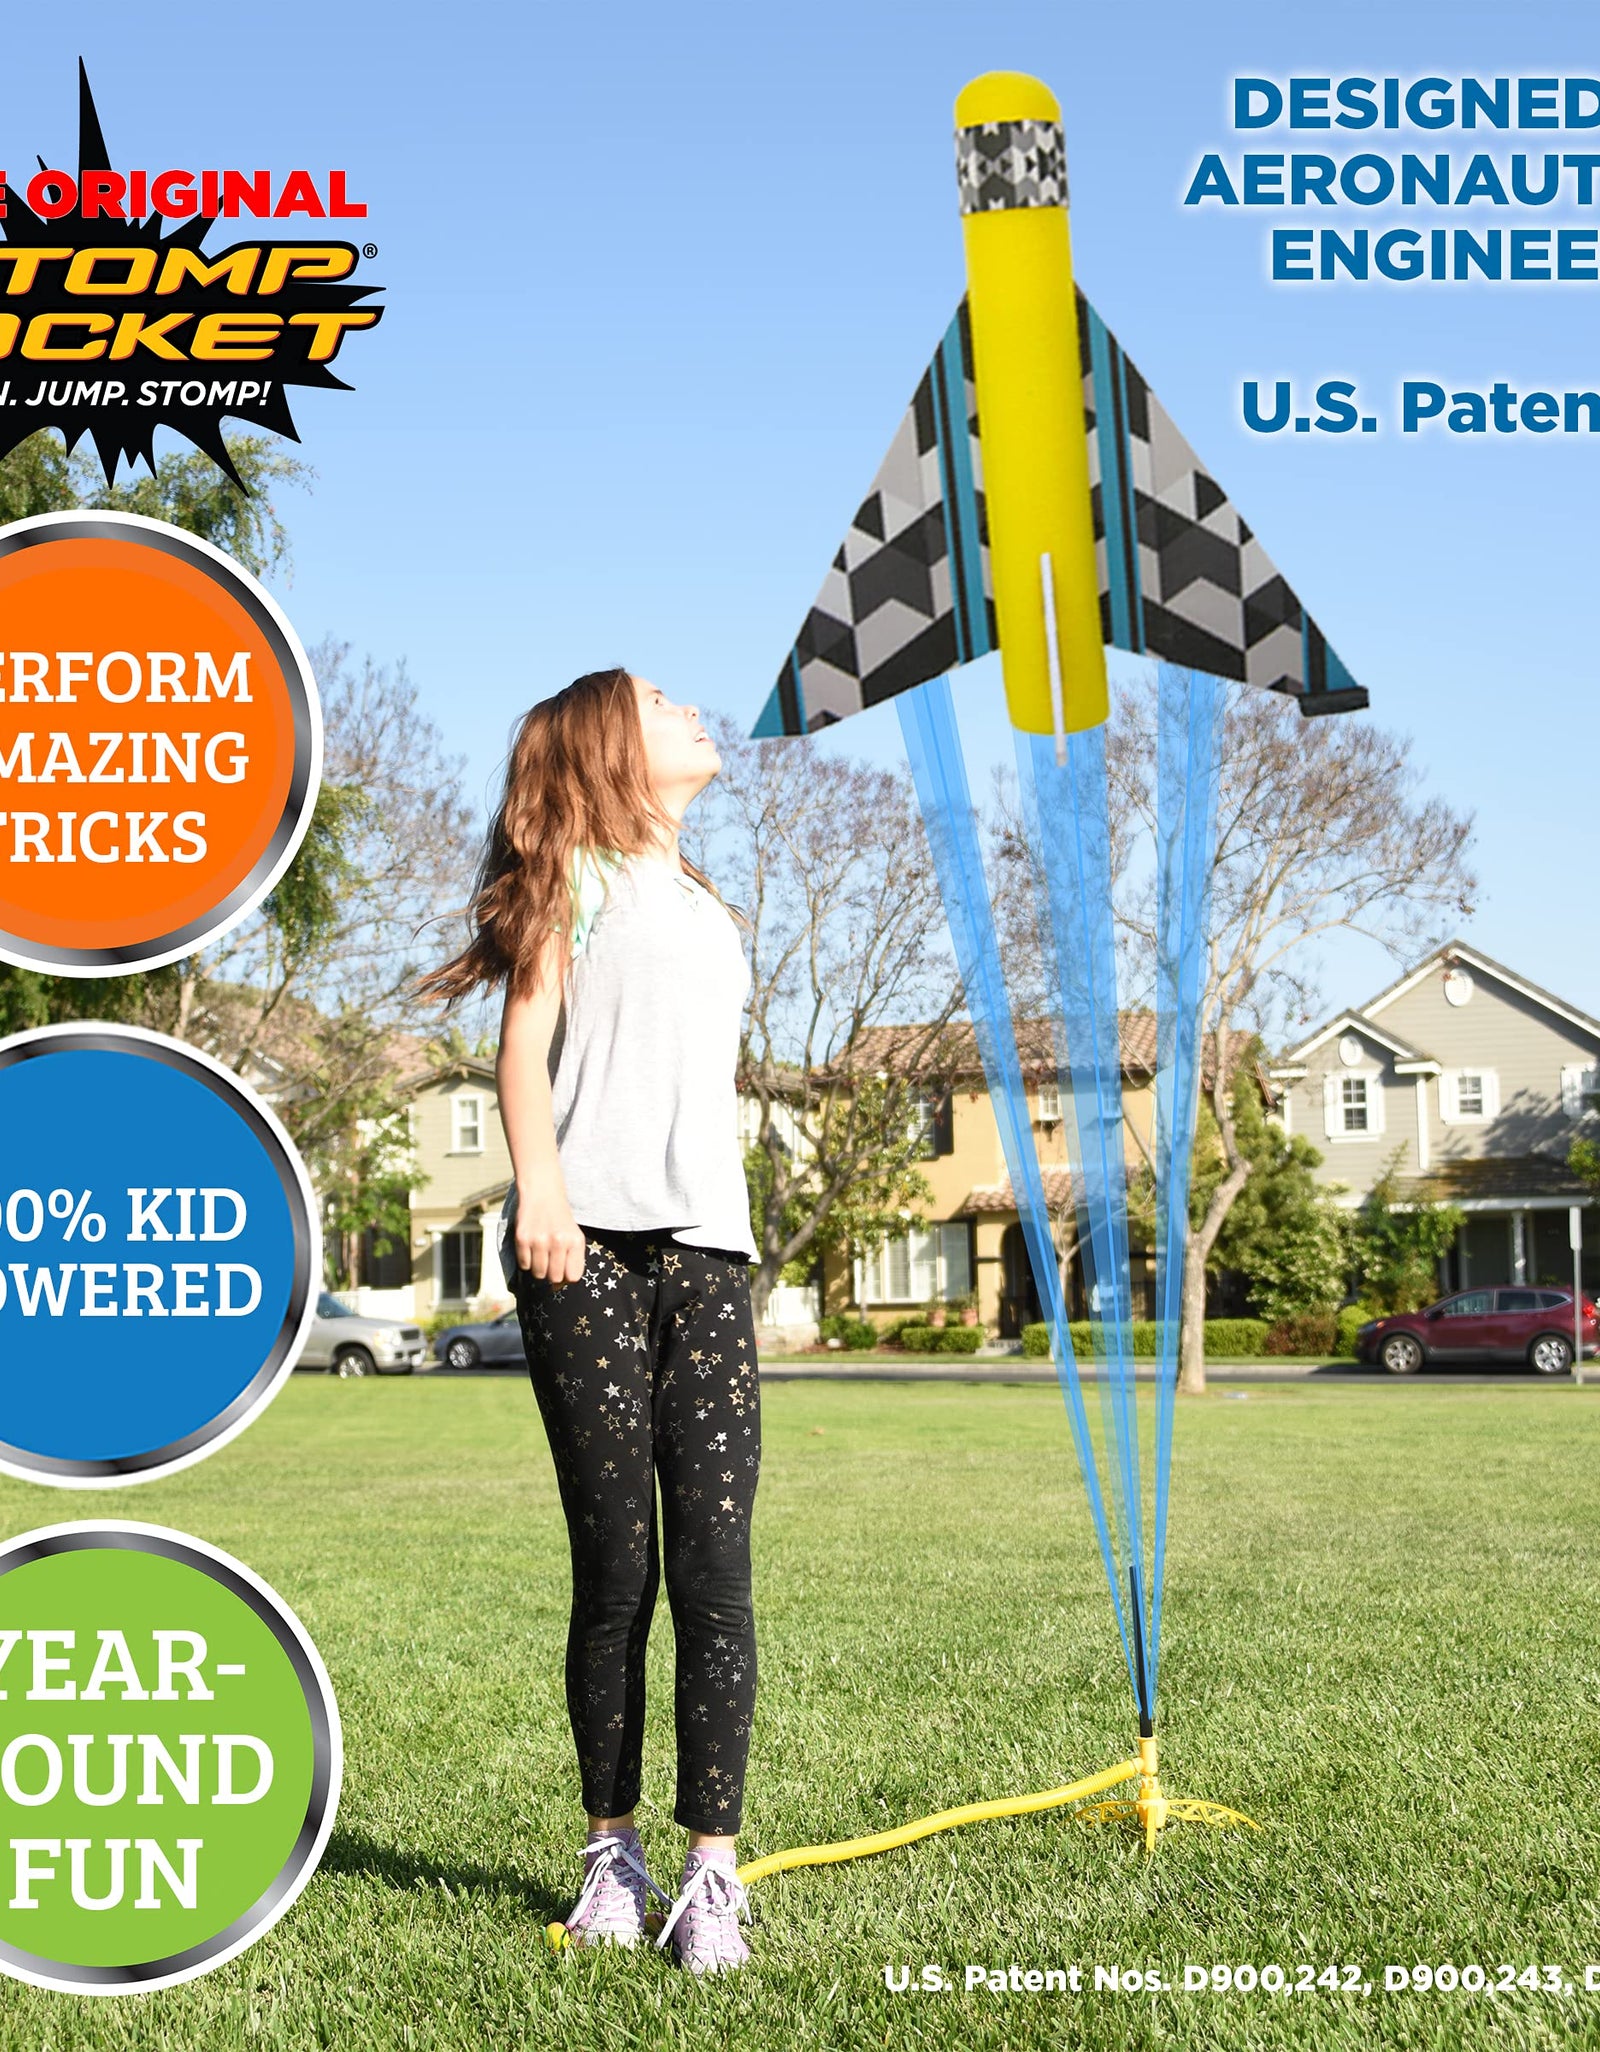 The Original Stomp Rocket Stunt Planes Launcher - 3 Foam Planes and Toy Air Rocket Launcher - Outdoor Rocket STEM Gifts for Boys and Girls - Ages 5 (6, 7, 8) and Up - Great for Outdoor Play